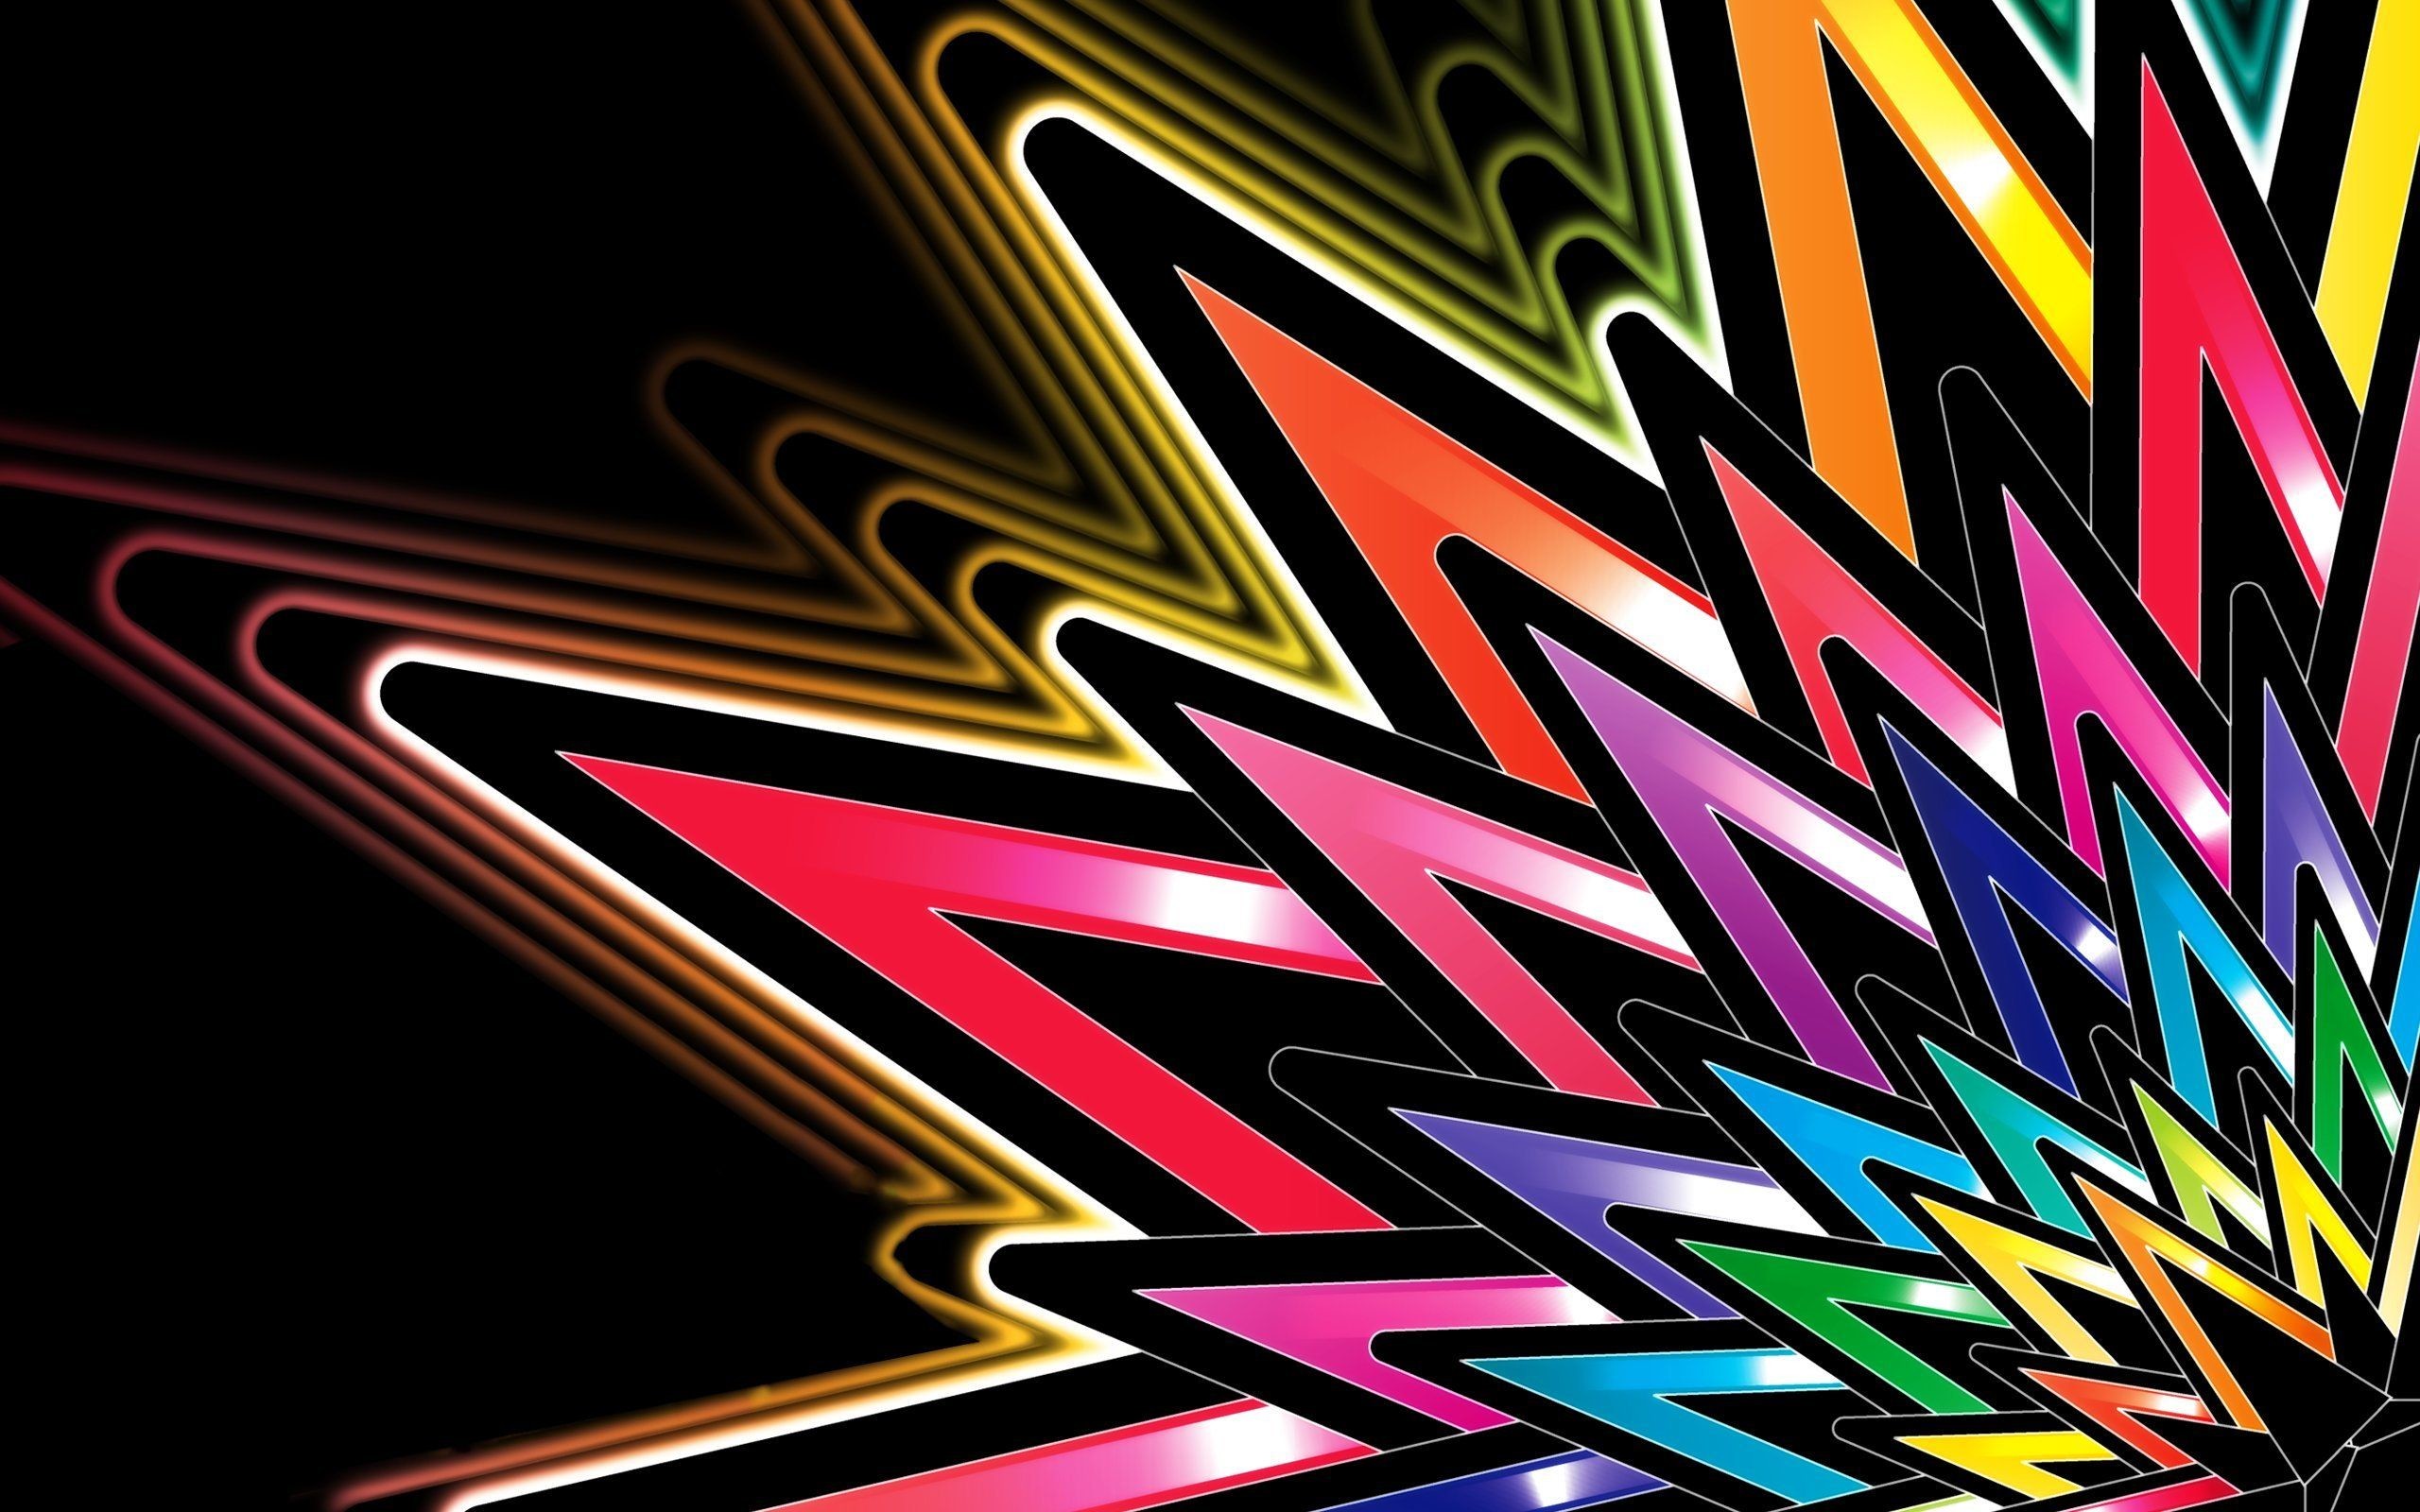 2560x1600 Colorful Abstract Wallpapers HD - Page 2 of 3 - wallpaper.wiki